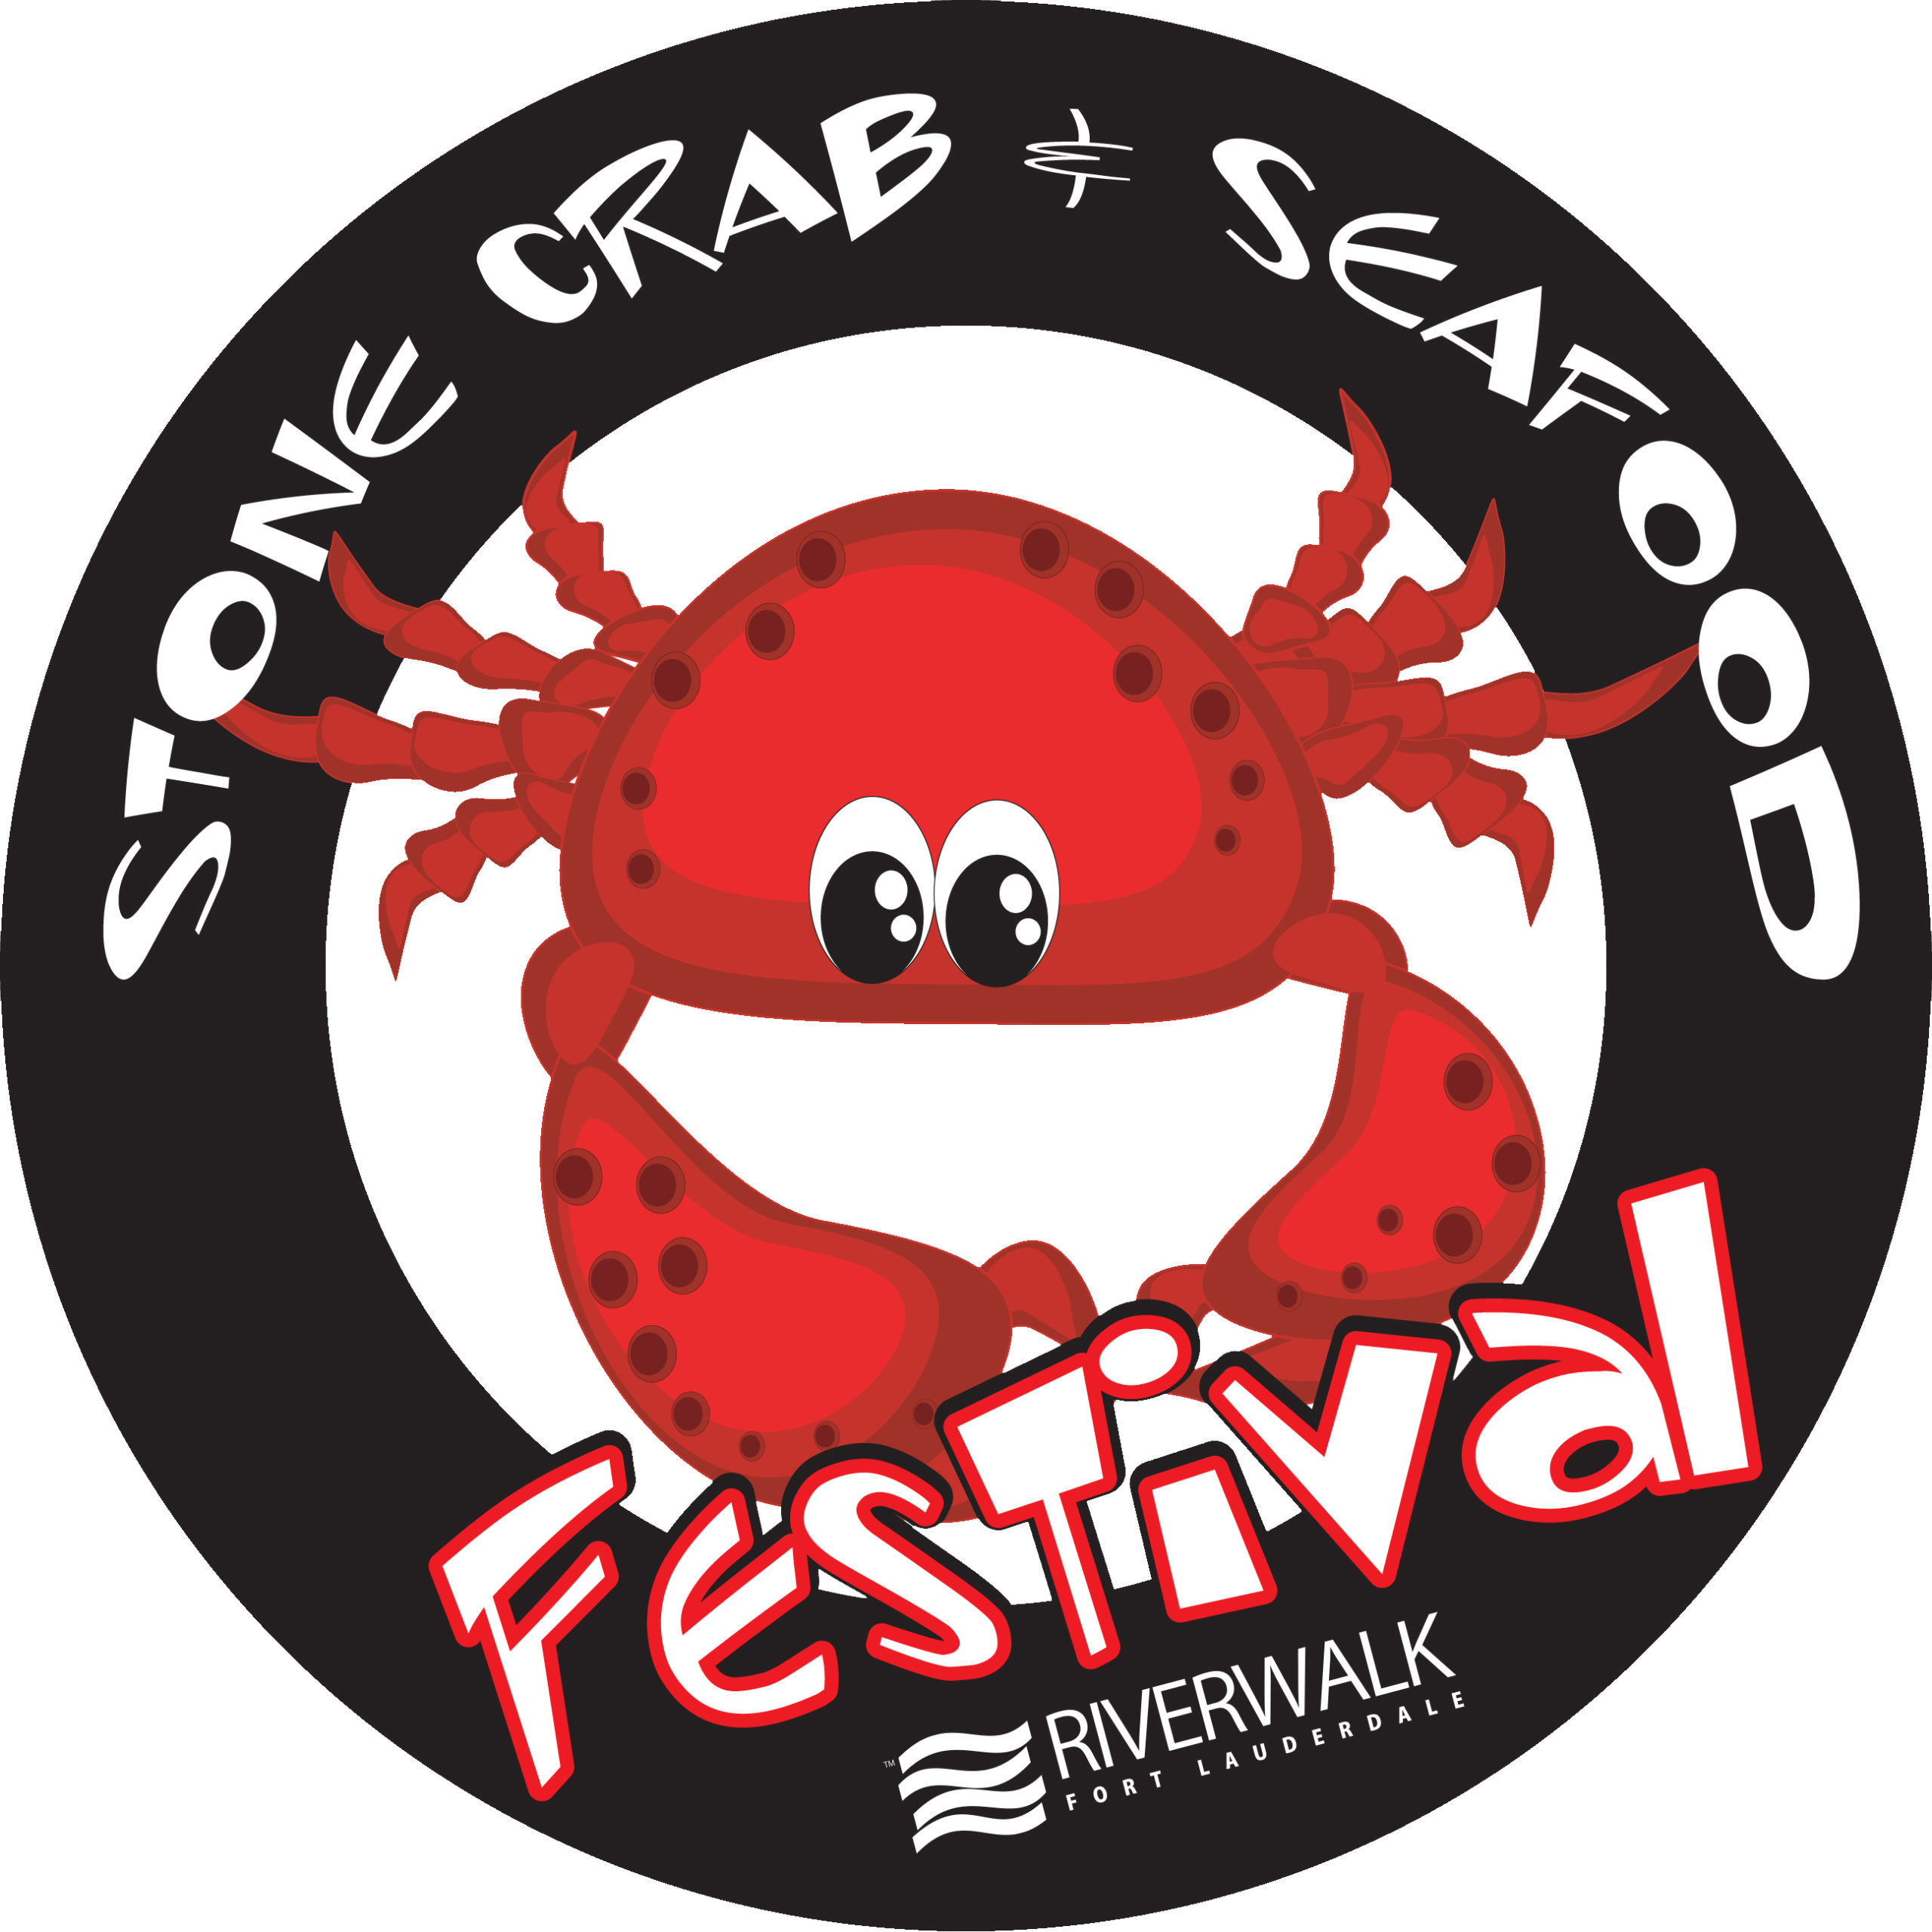 14th Annual Riverwalk Stone Crab & Seafood Festival - Presented by Rivertail